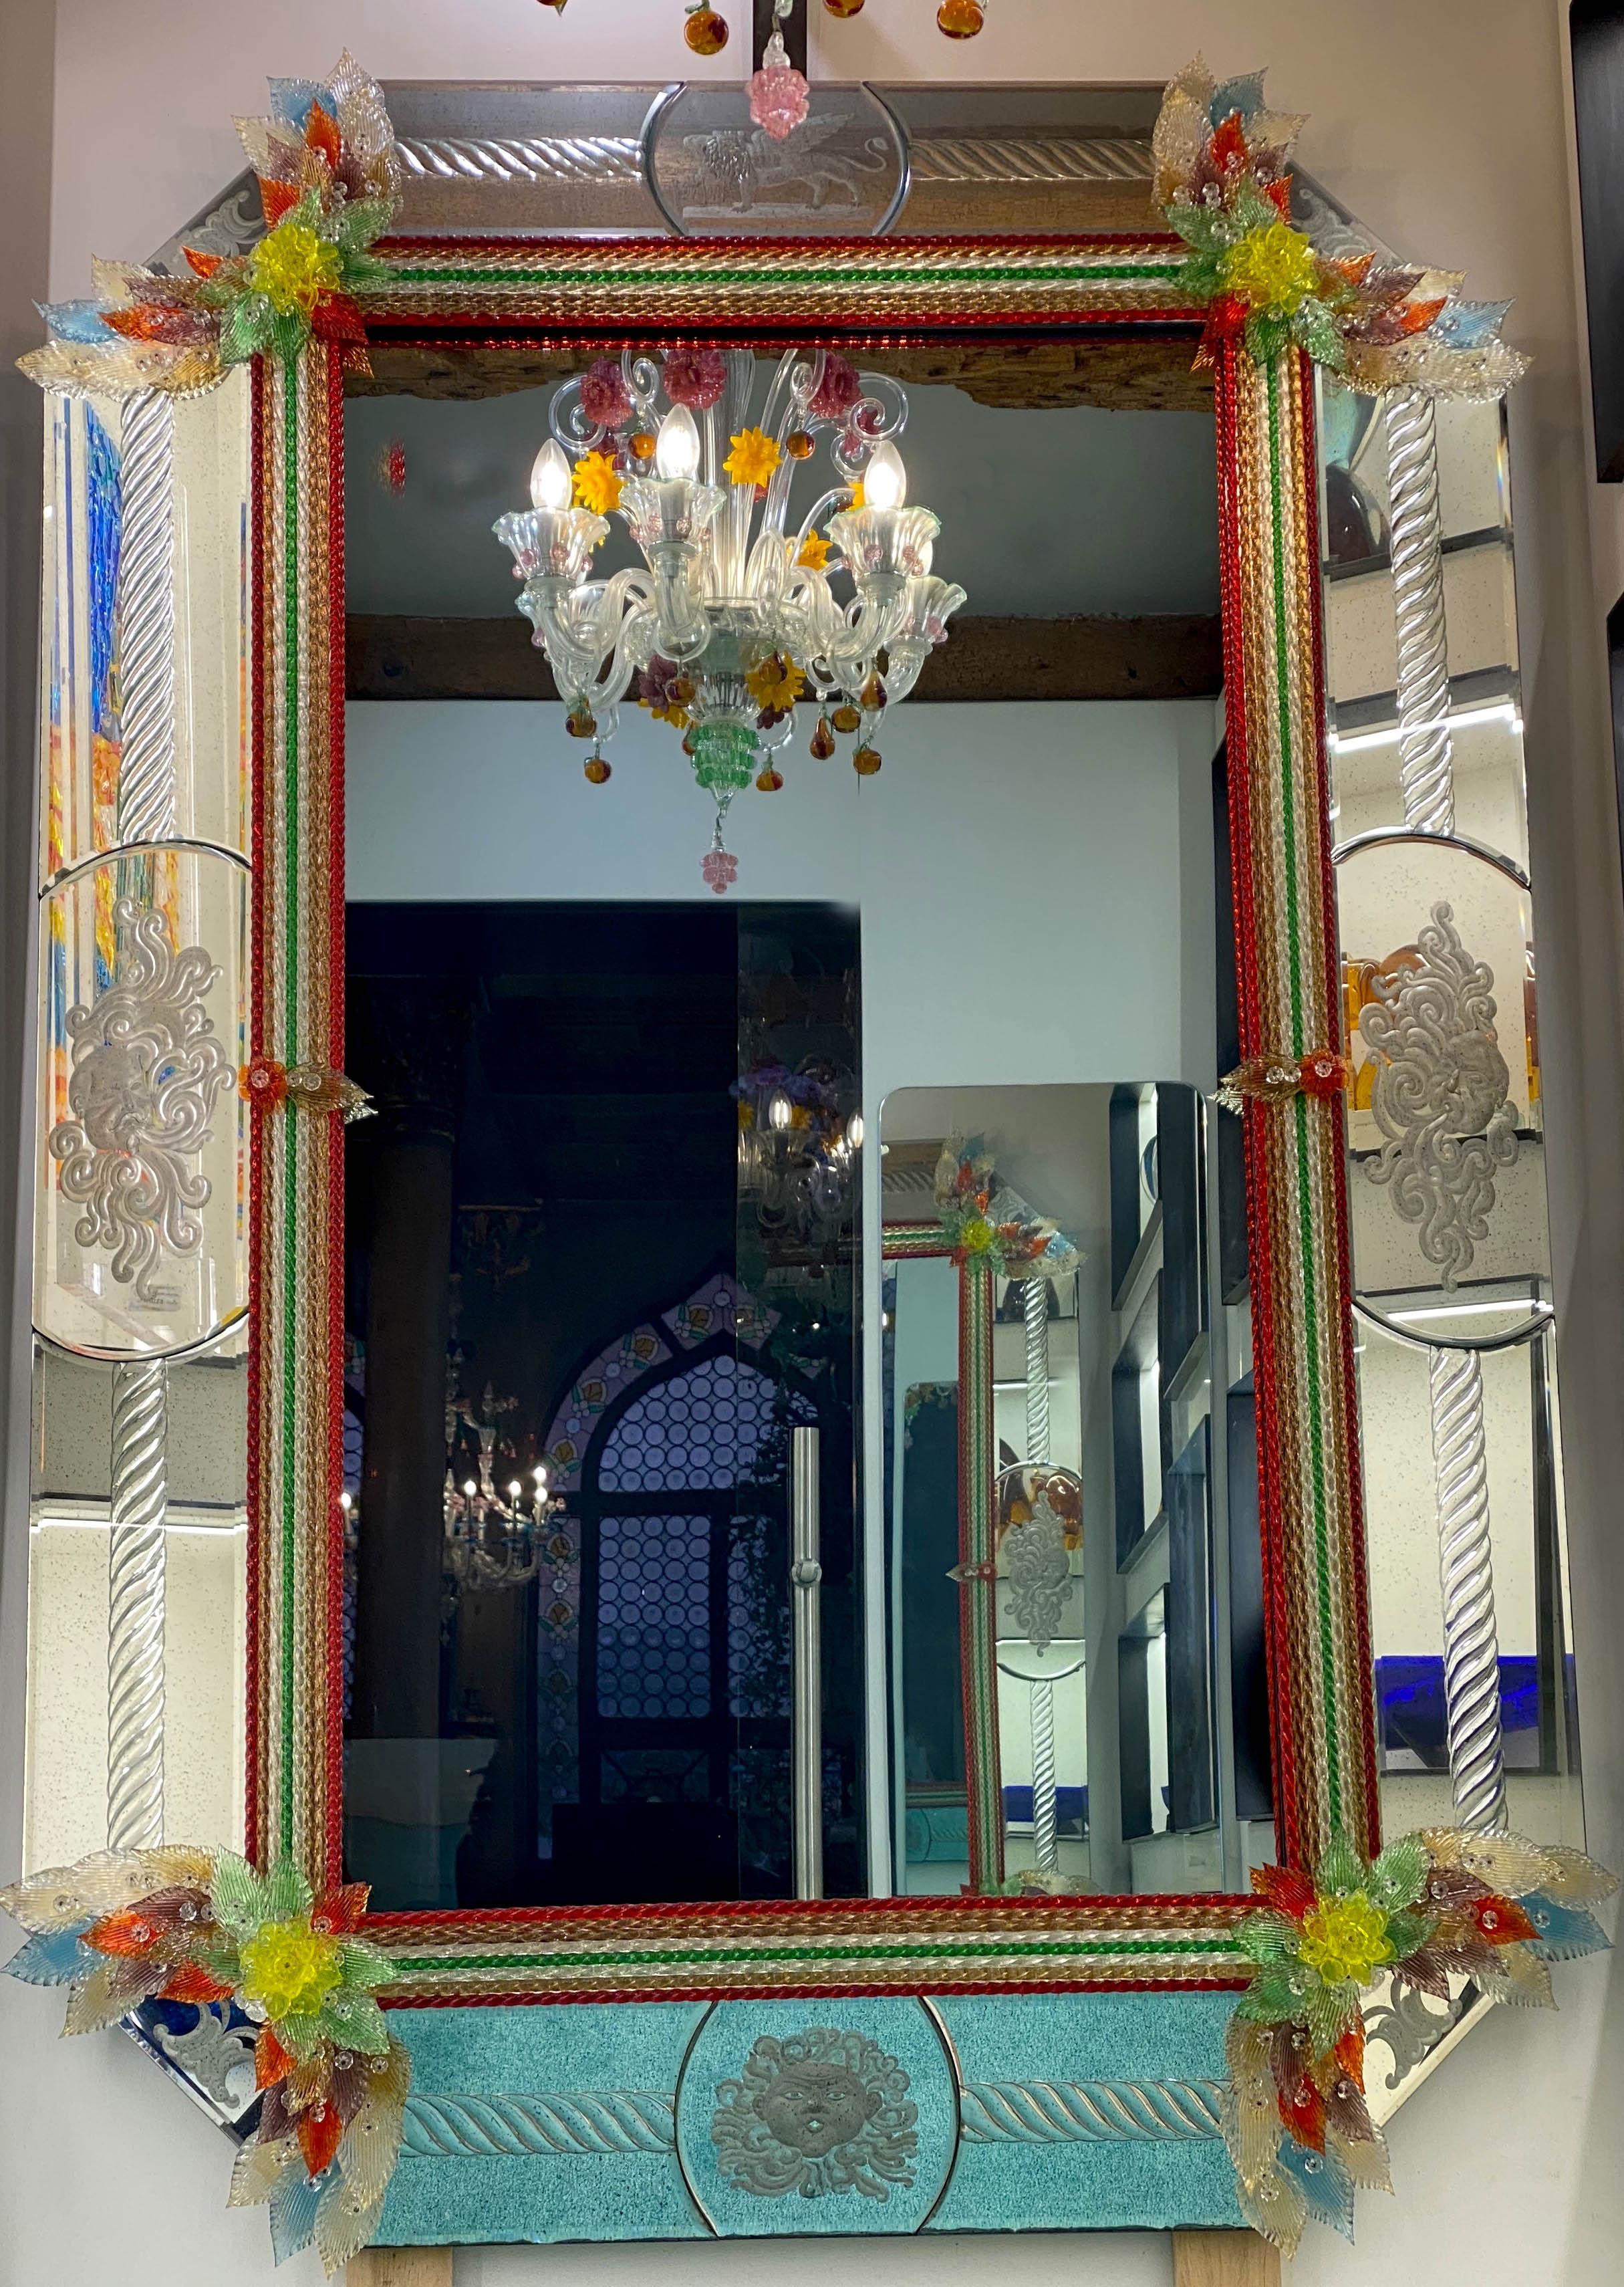 This beautiful Venetian mirror features etched figure motifs adorning the mirrored frame. Centered by a lion figure symbol of Venice. Along the edges of the frame are colorful glass rope accents and numerous multicolor glass leaves and